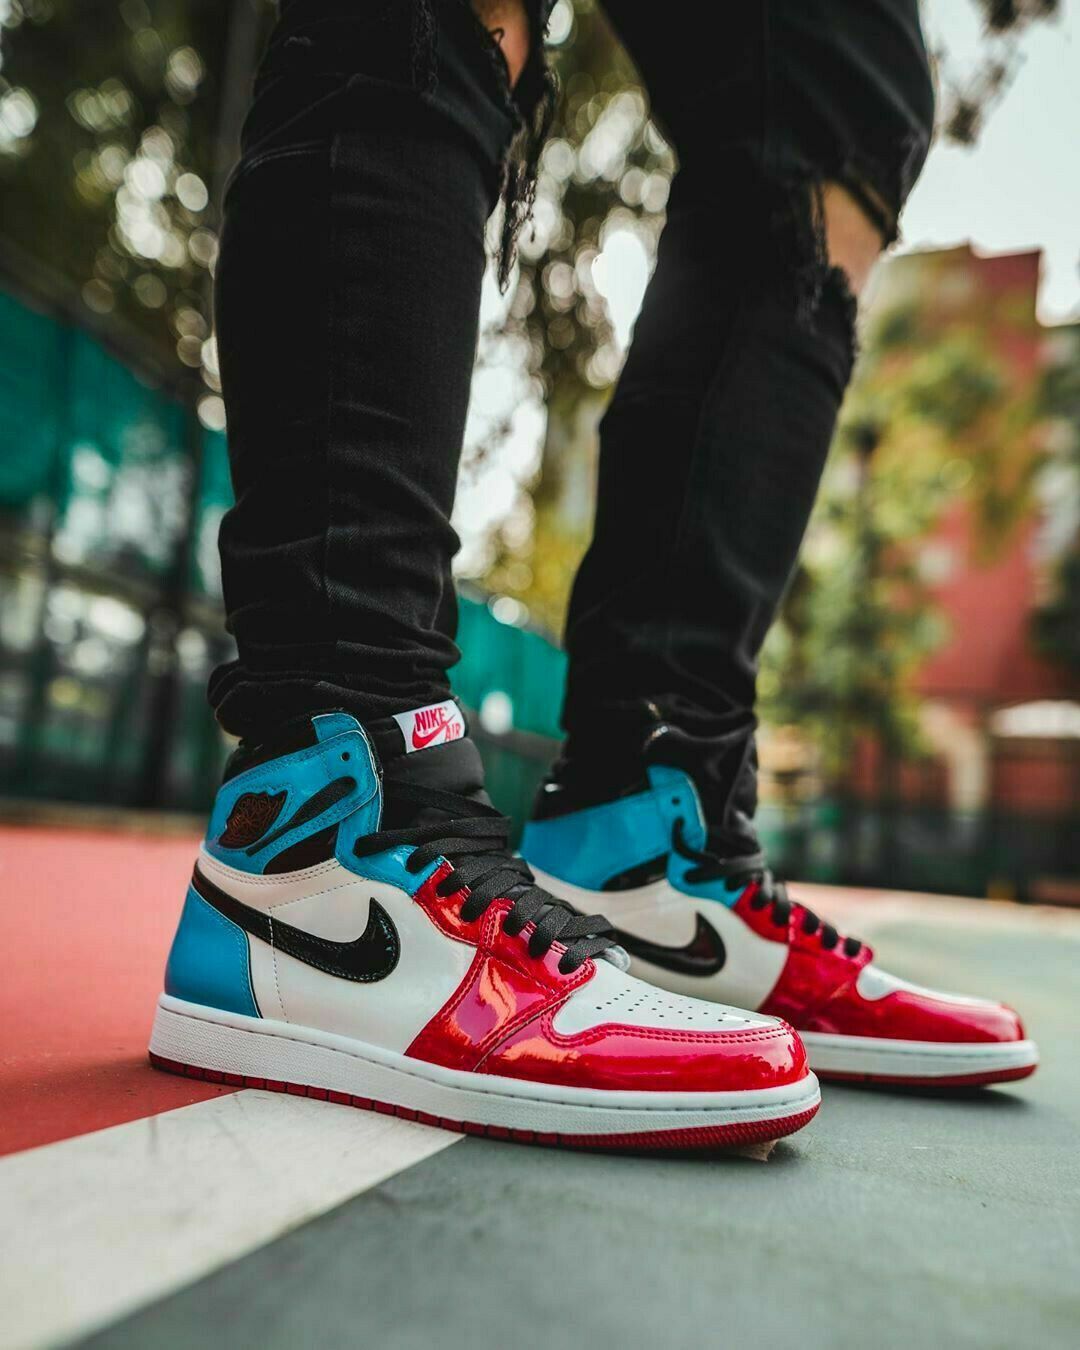 Explore Bright Styles with Jordan 1 Blue and Red Sneakers | eBay